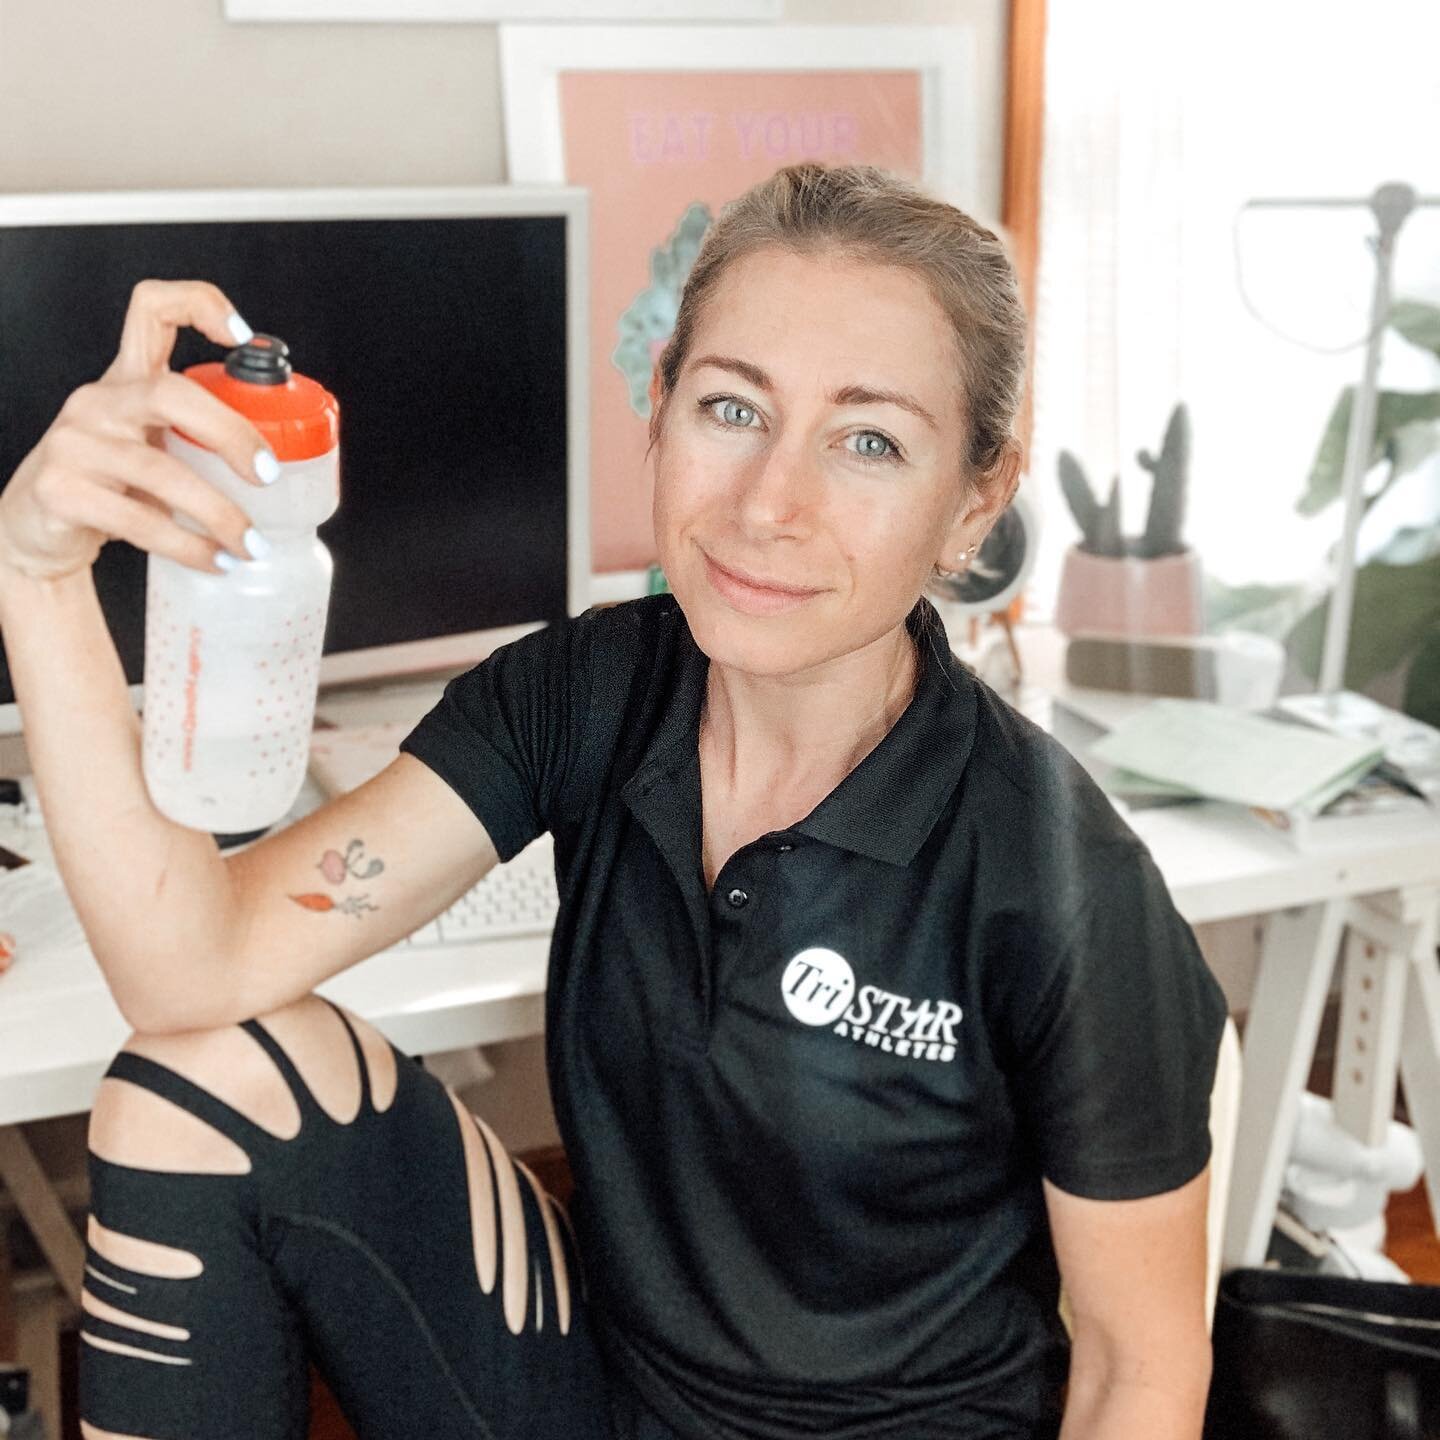 &ldquo;What to eat before a big workout or race is a question I get constantly&rdquo; 
PRE-WORKOUT FUELING WITH LORI NEDESCU, MS RD CSSD

Learn more in our bio link how to fuel ⛽️ up before your next big session. 🚴🏻&zwj;♂️🔨 🥘 #tristarathletes #le